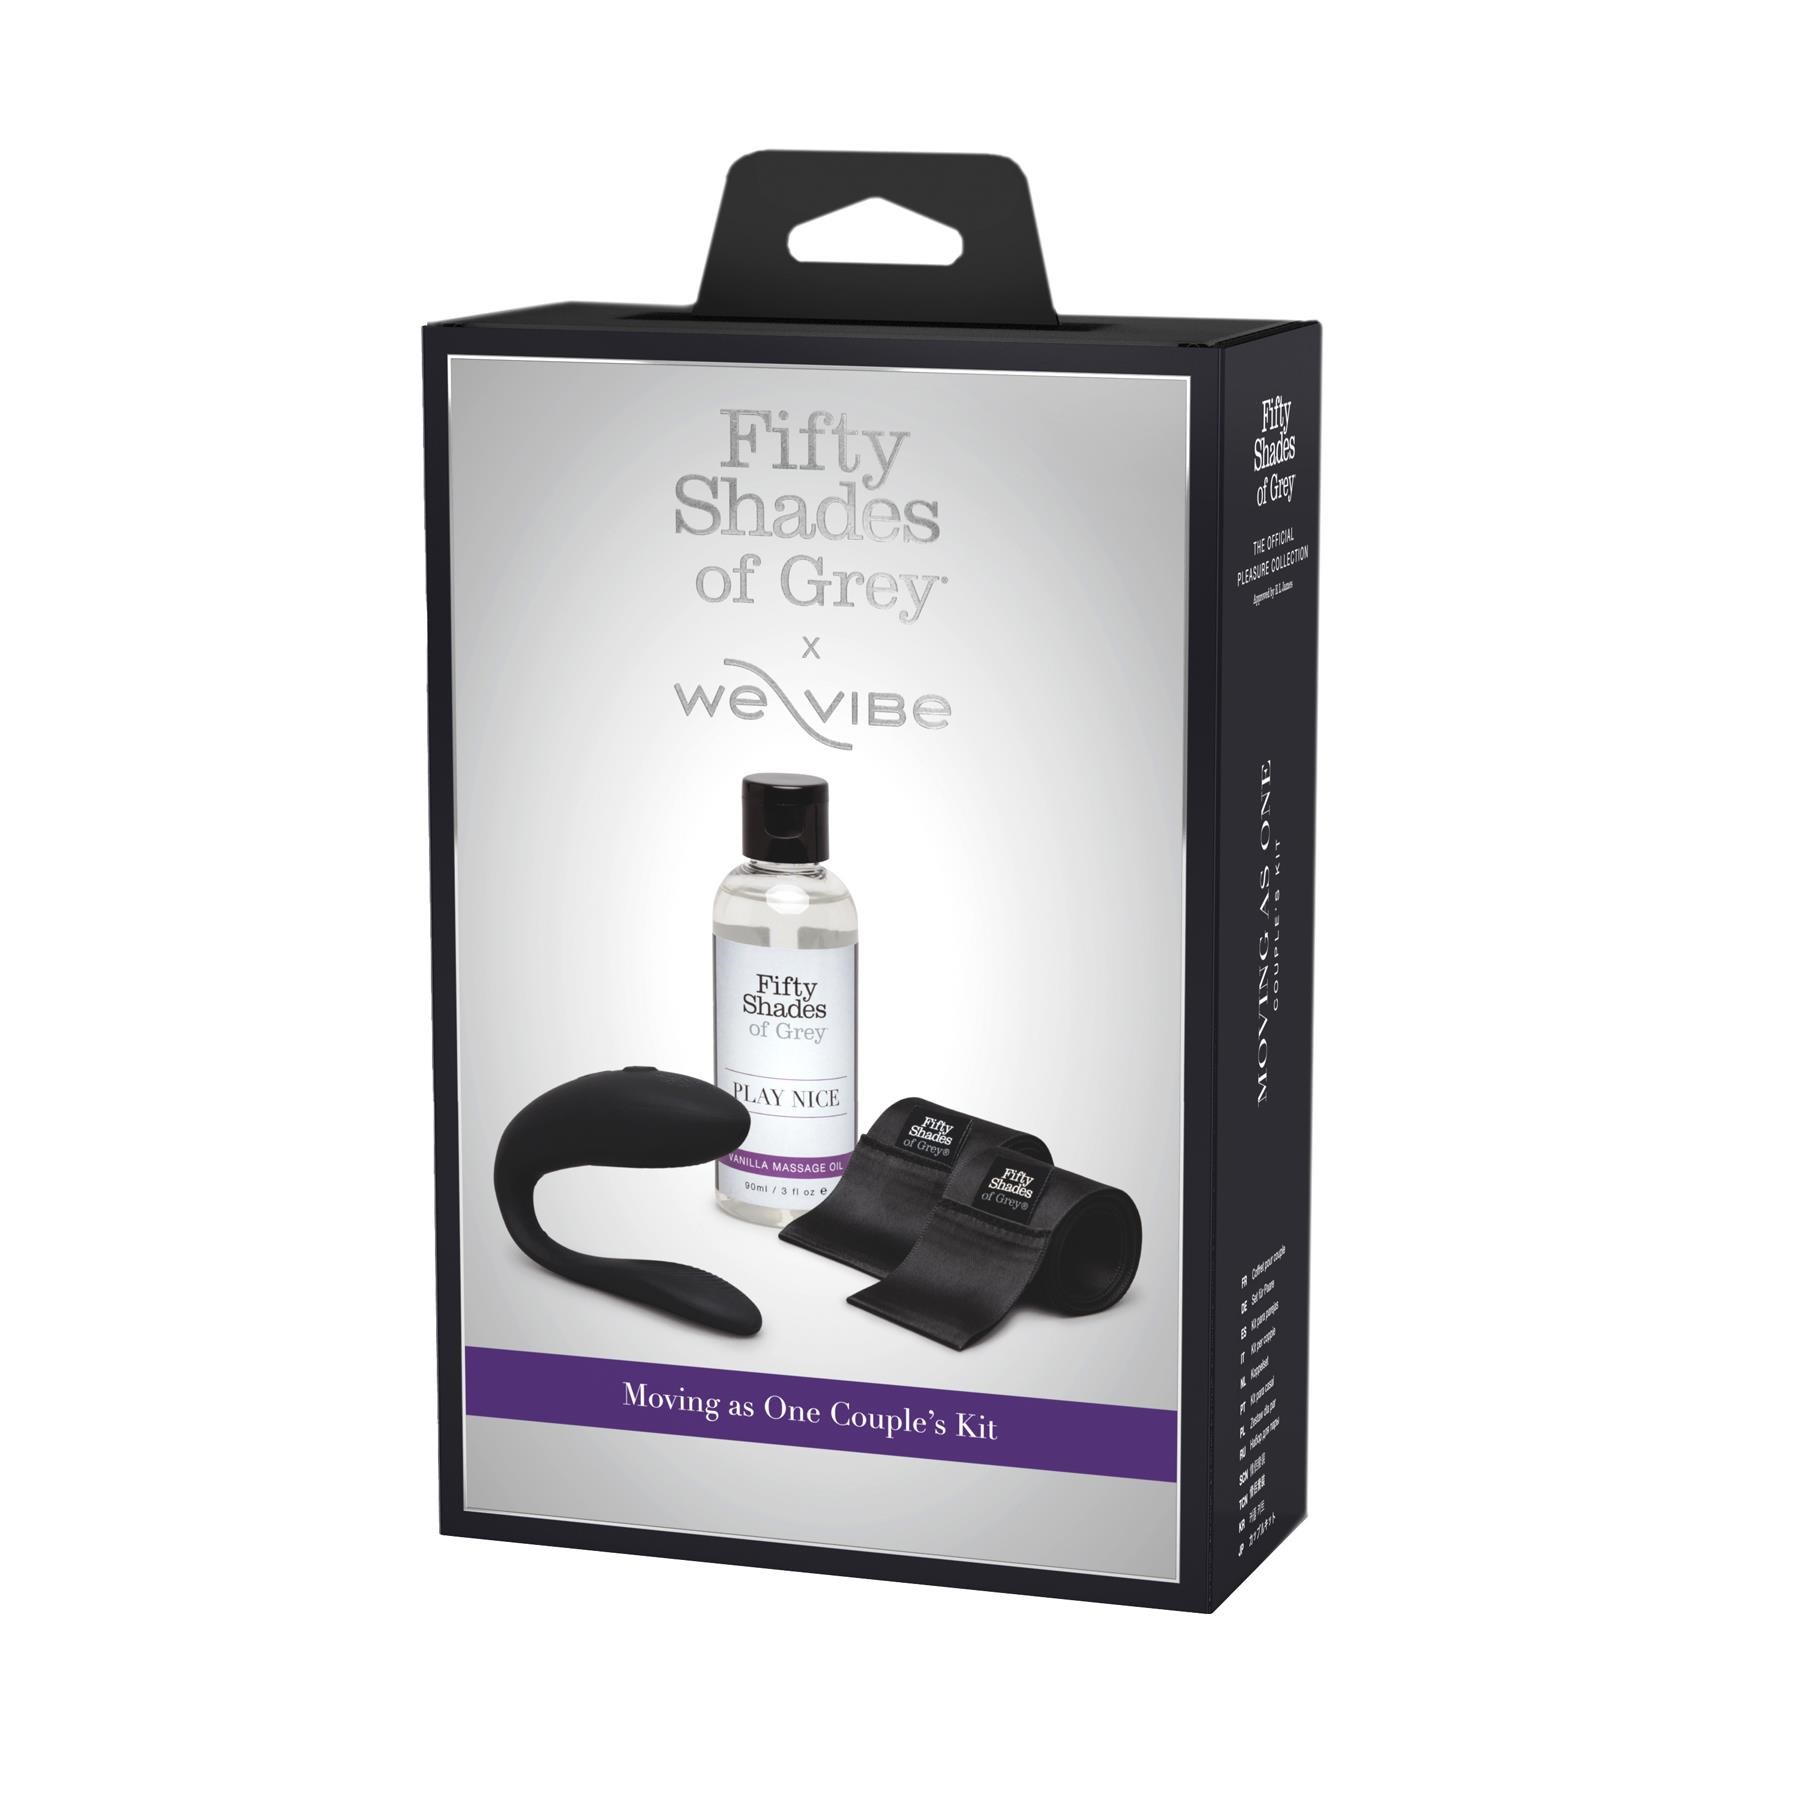 Fifty Shades of Grey Moving As One Kit- Packaging